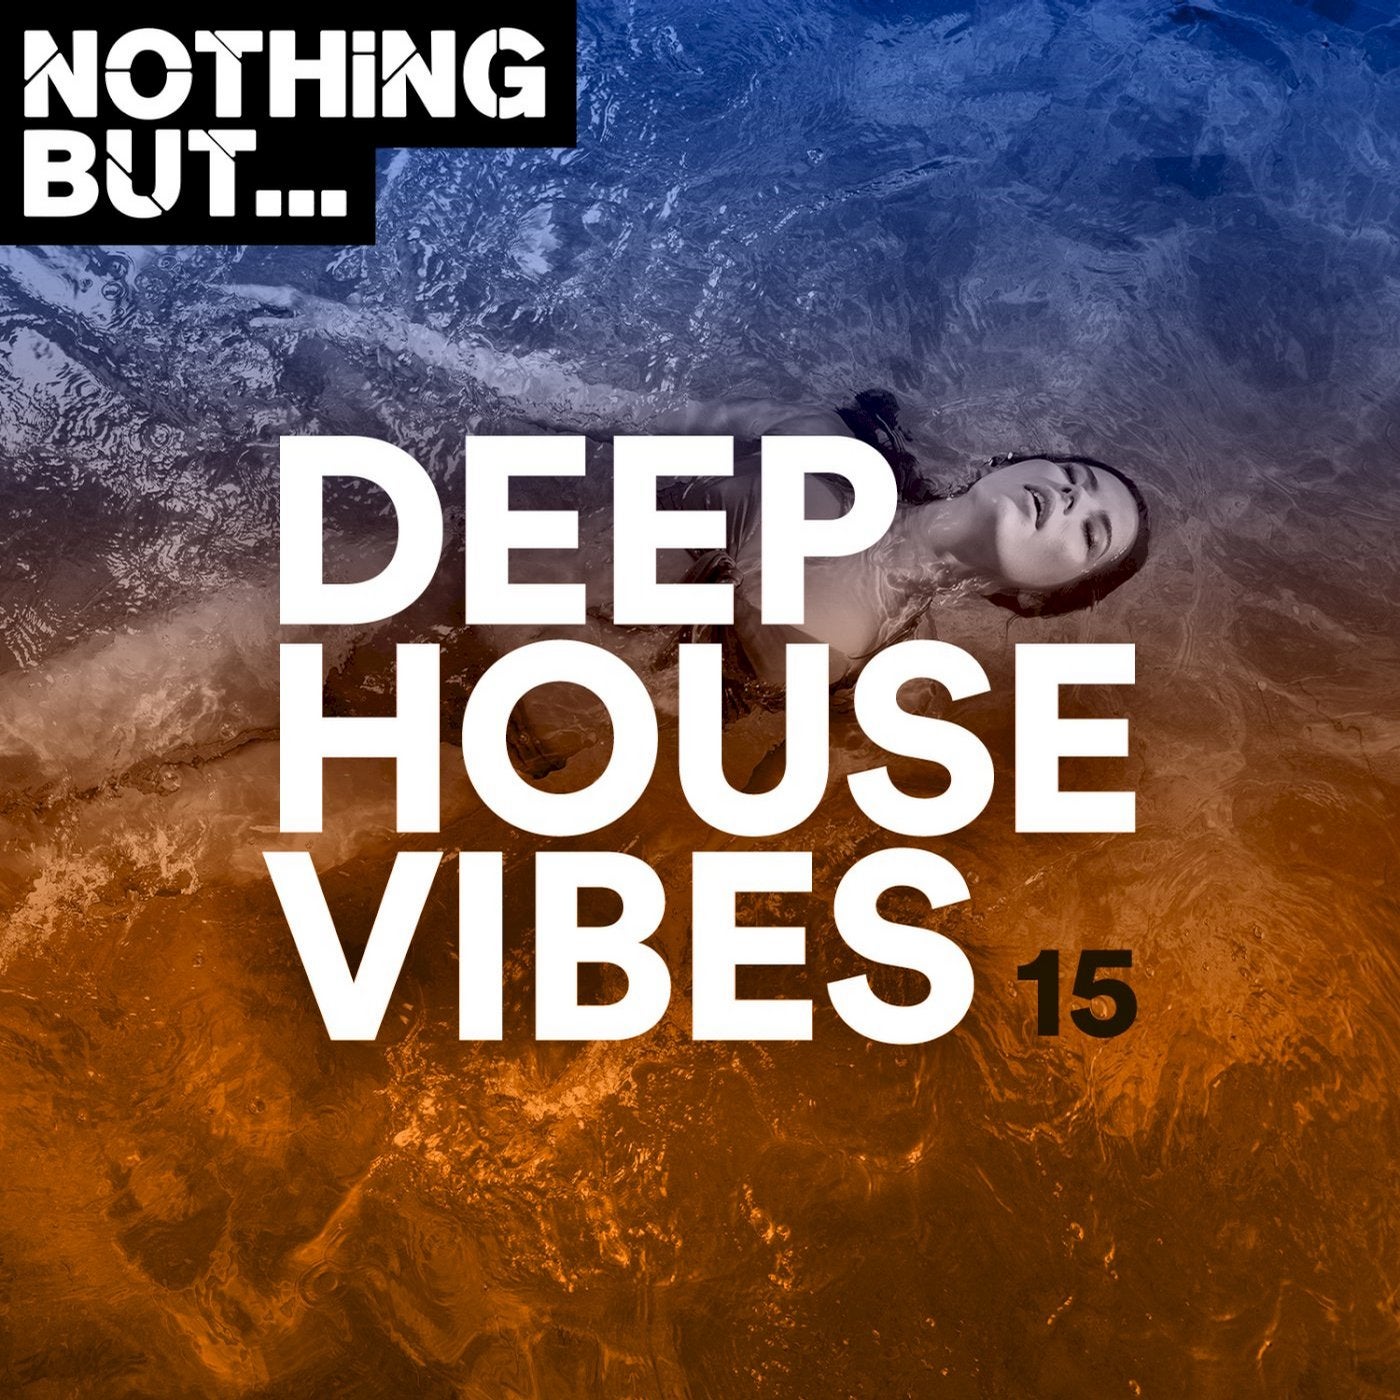 Nothing But... Deep House Vibes, Vol. 15